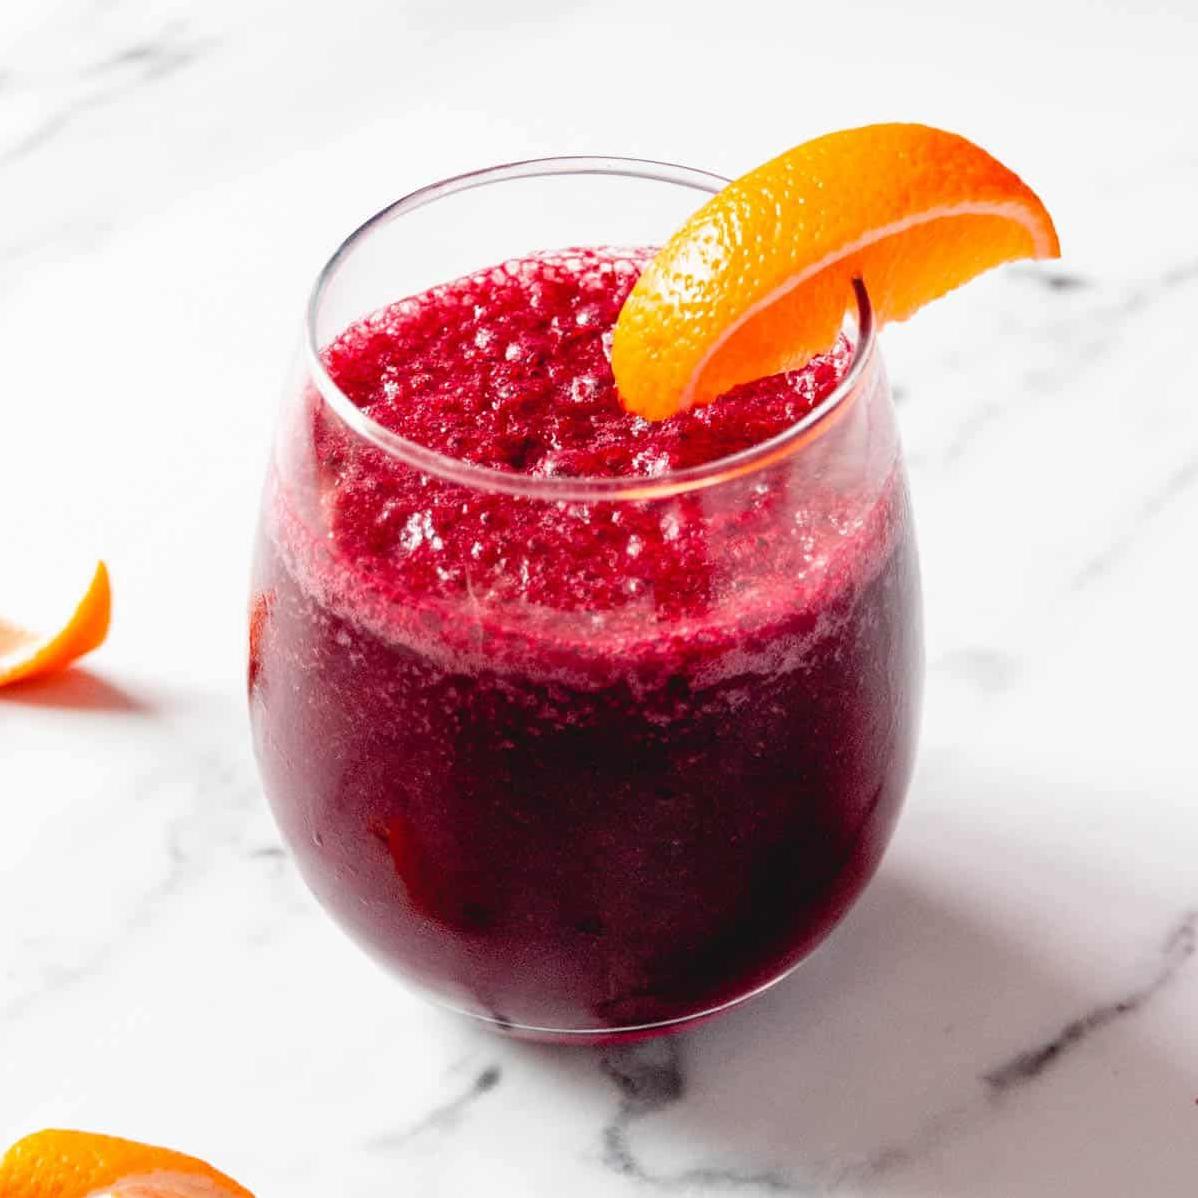  A sip away from a berry good time!